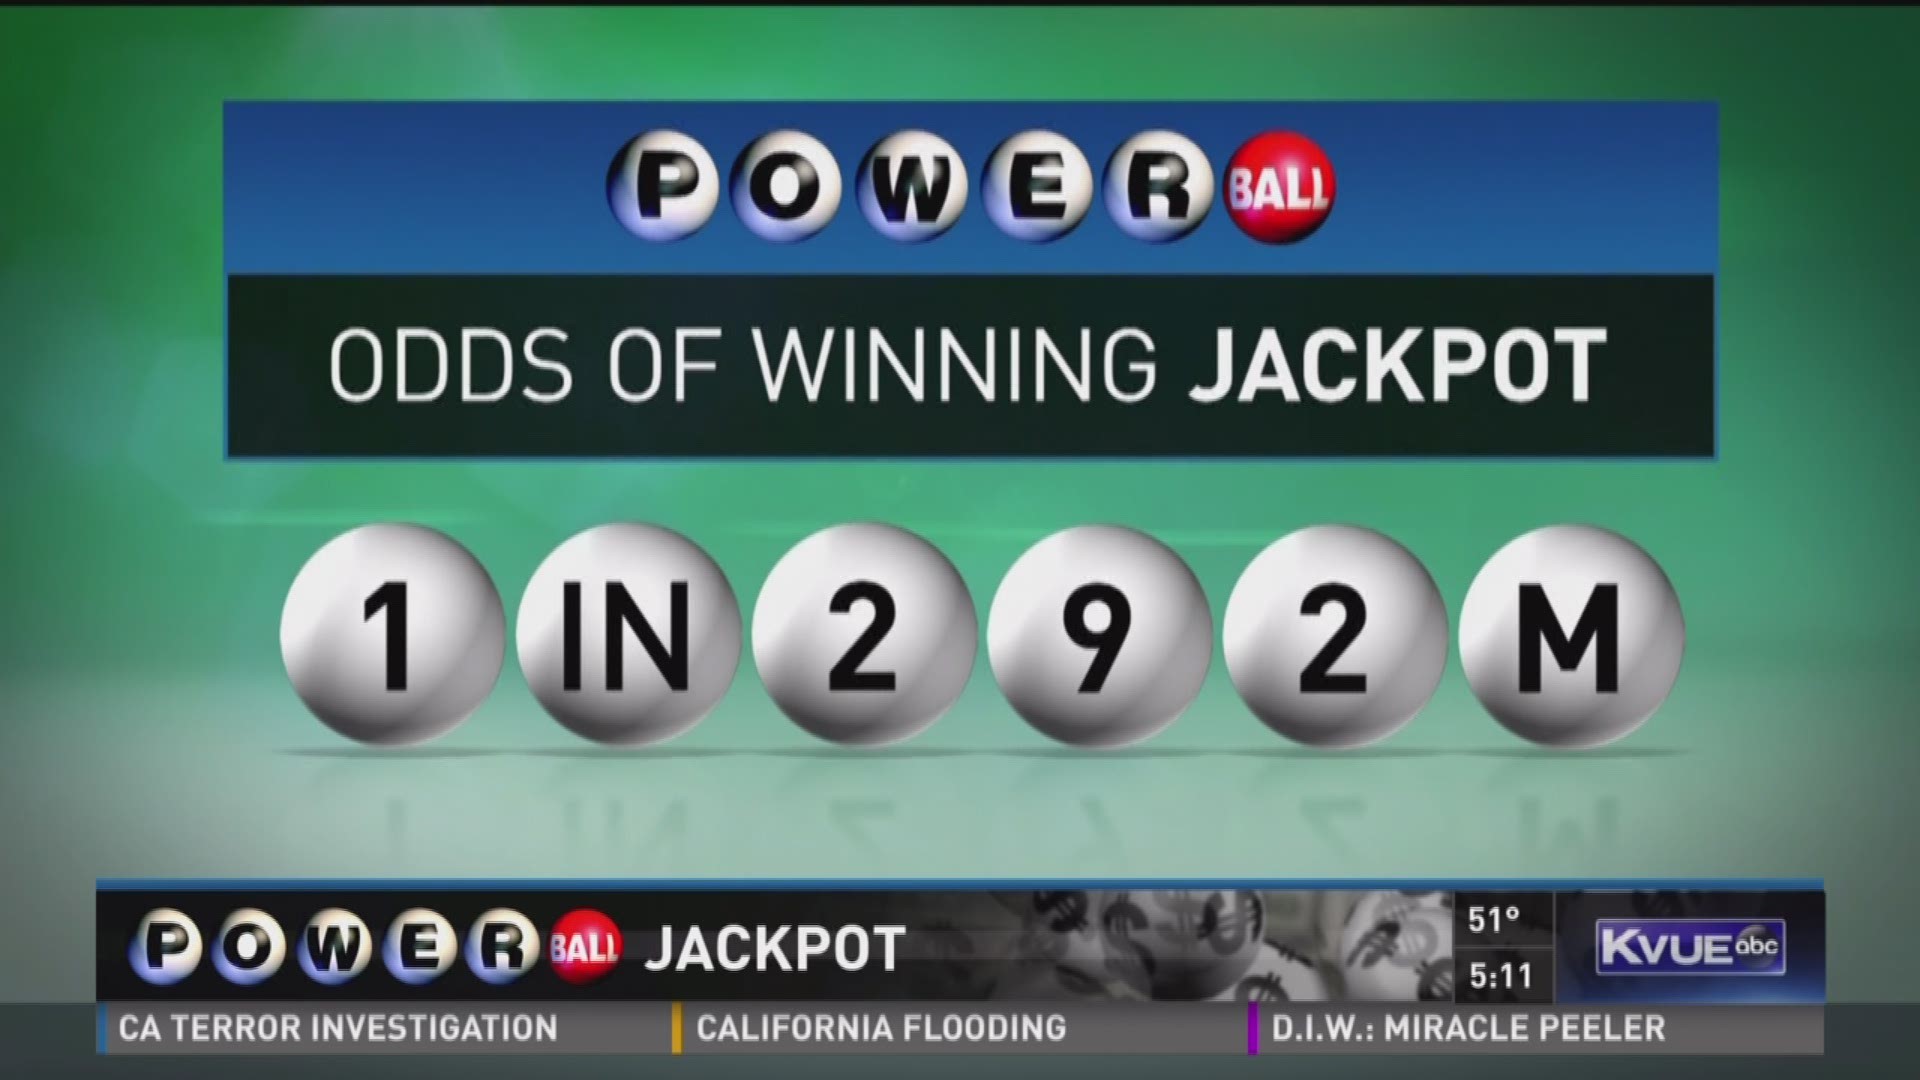 current value powerball jackpot